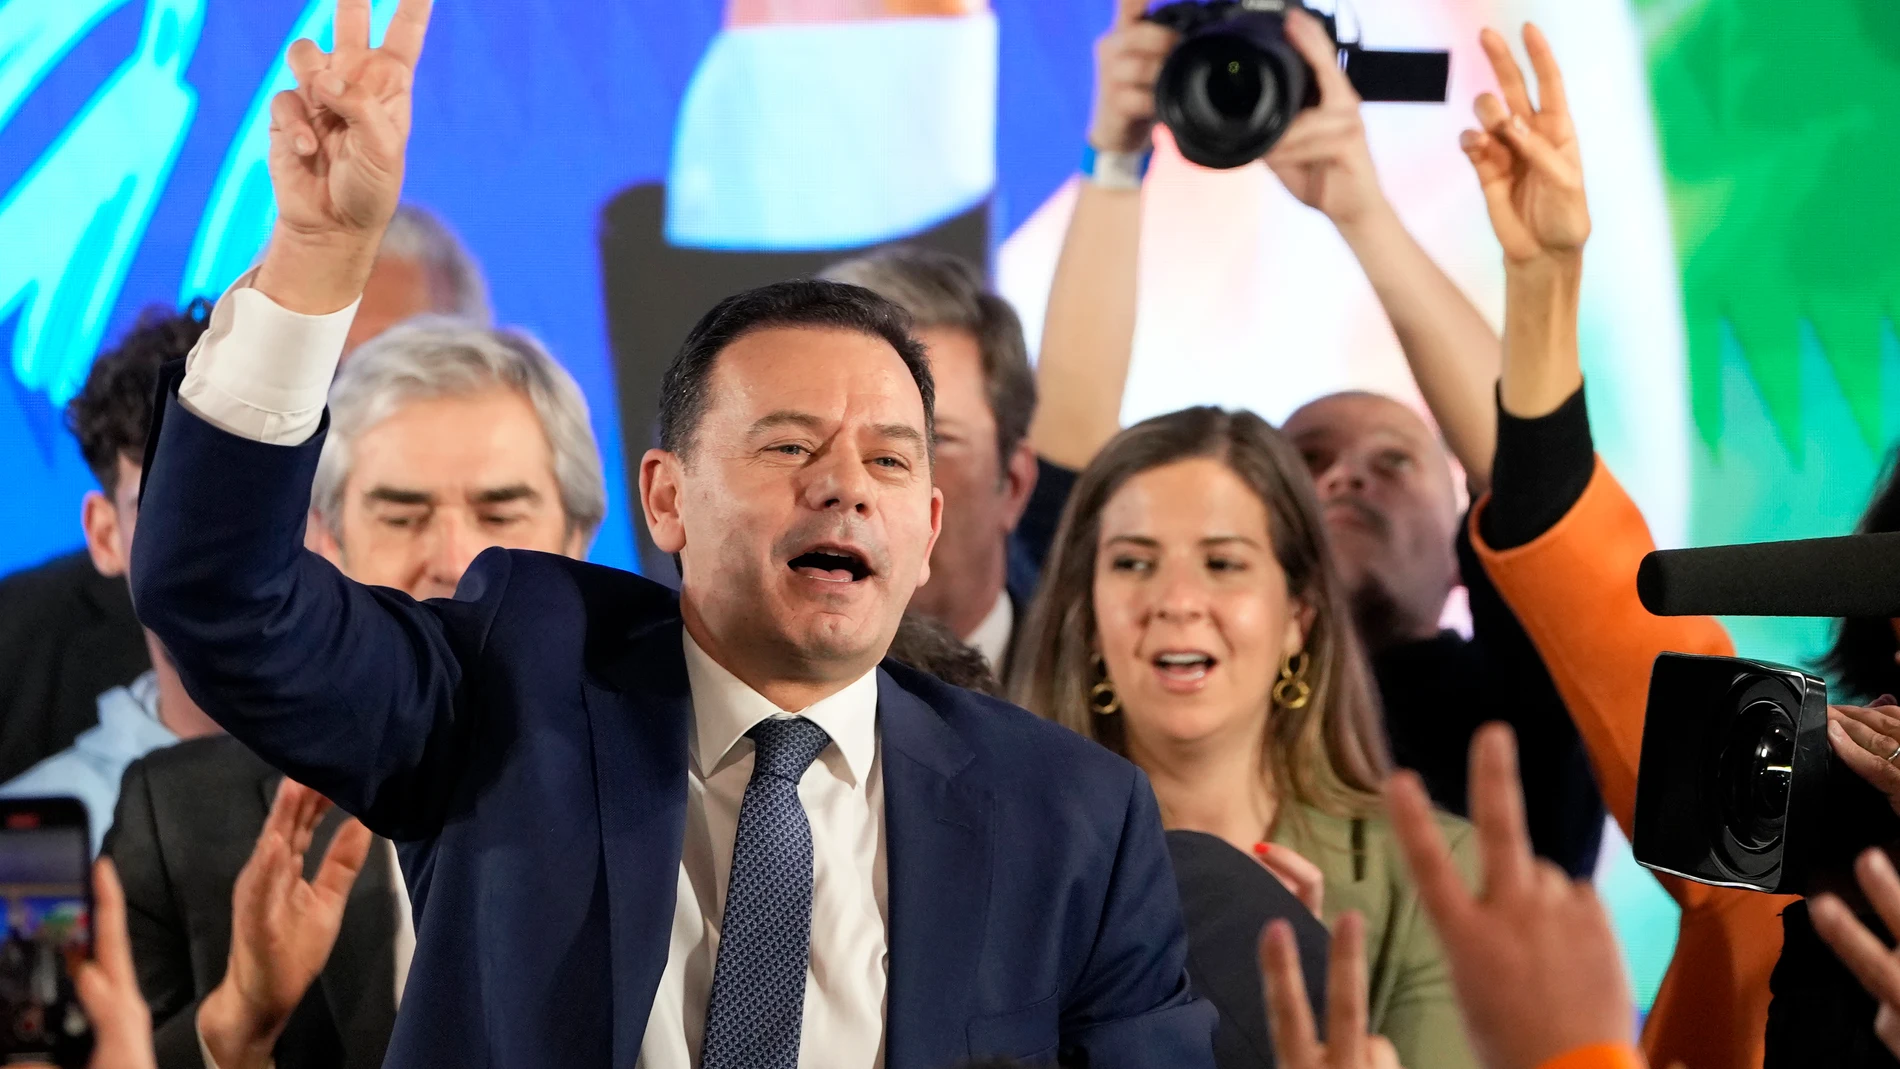 Luis Montenegro, leader of the center-right Democratic Alliance, gestures to supporters after claiming victory in Portugal's election, in Lisbon, Monday, March 11, 2024. AP Photo/Armando Franca)